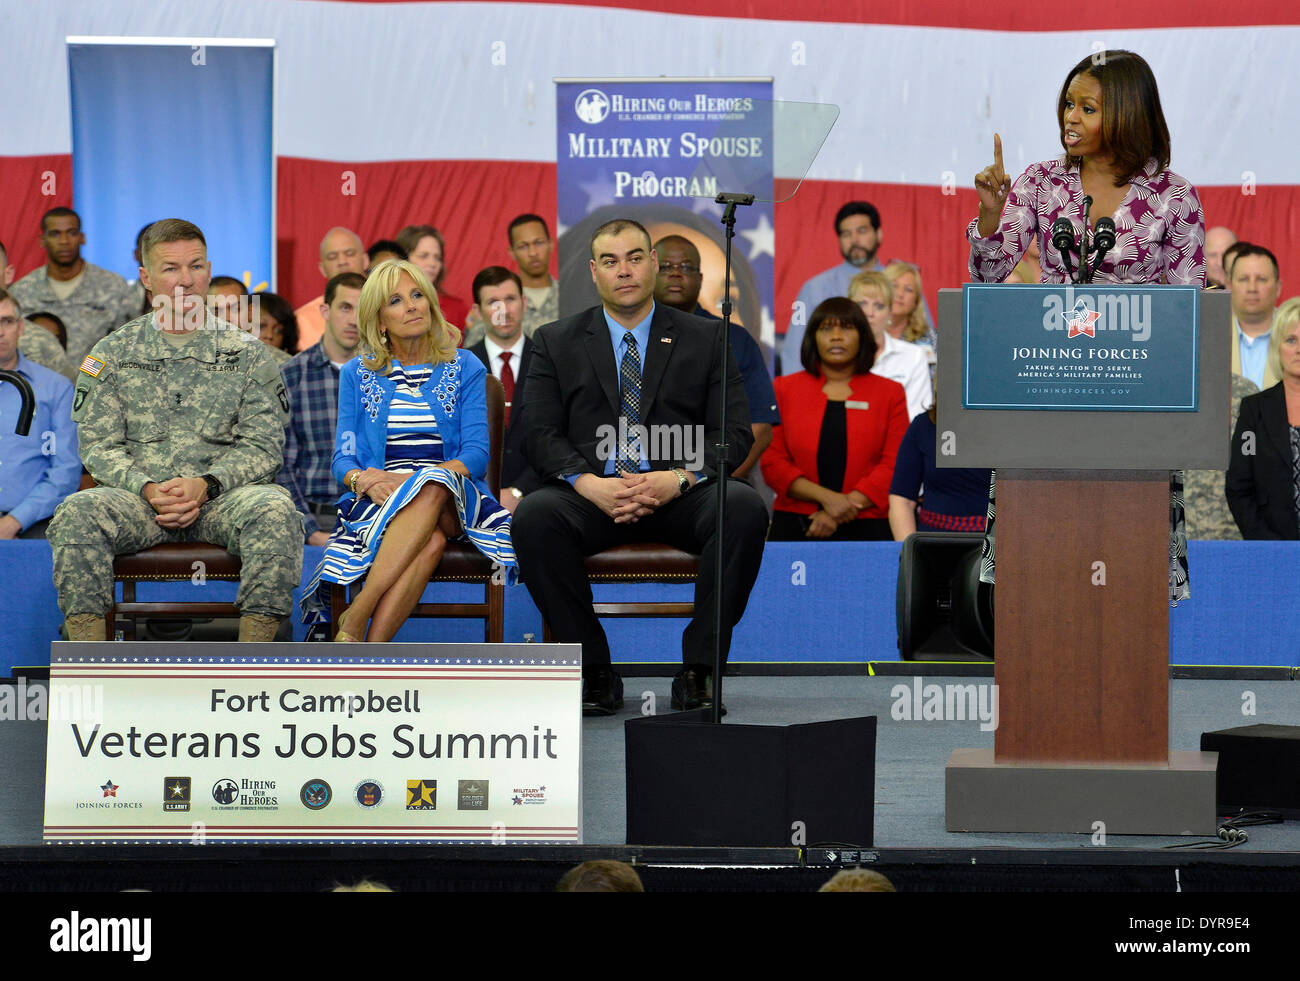 US First lady Michelle Obama speaks to soldiers, family members and employers during a veterans job summit and career forum at Fort Campbell April 23, 2014, Hopkinsville, Kentucky. From left, Army Maj. Gen. James McConville, the commanding general of the 101st Airborne Division, Jill Biden and Sgt. Aaron Wanlessr, with the 4th Brigade Combat Team. Stock Photo